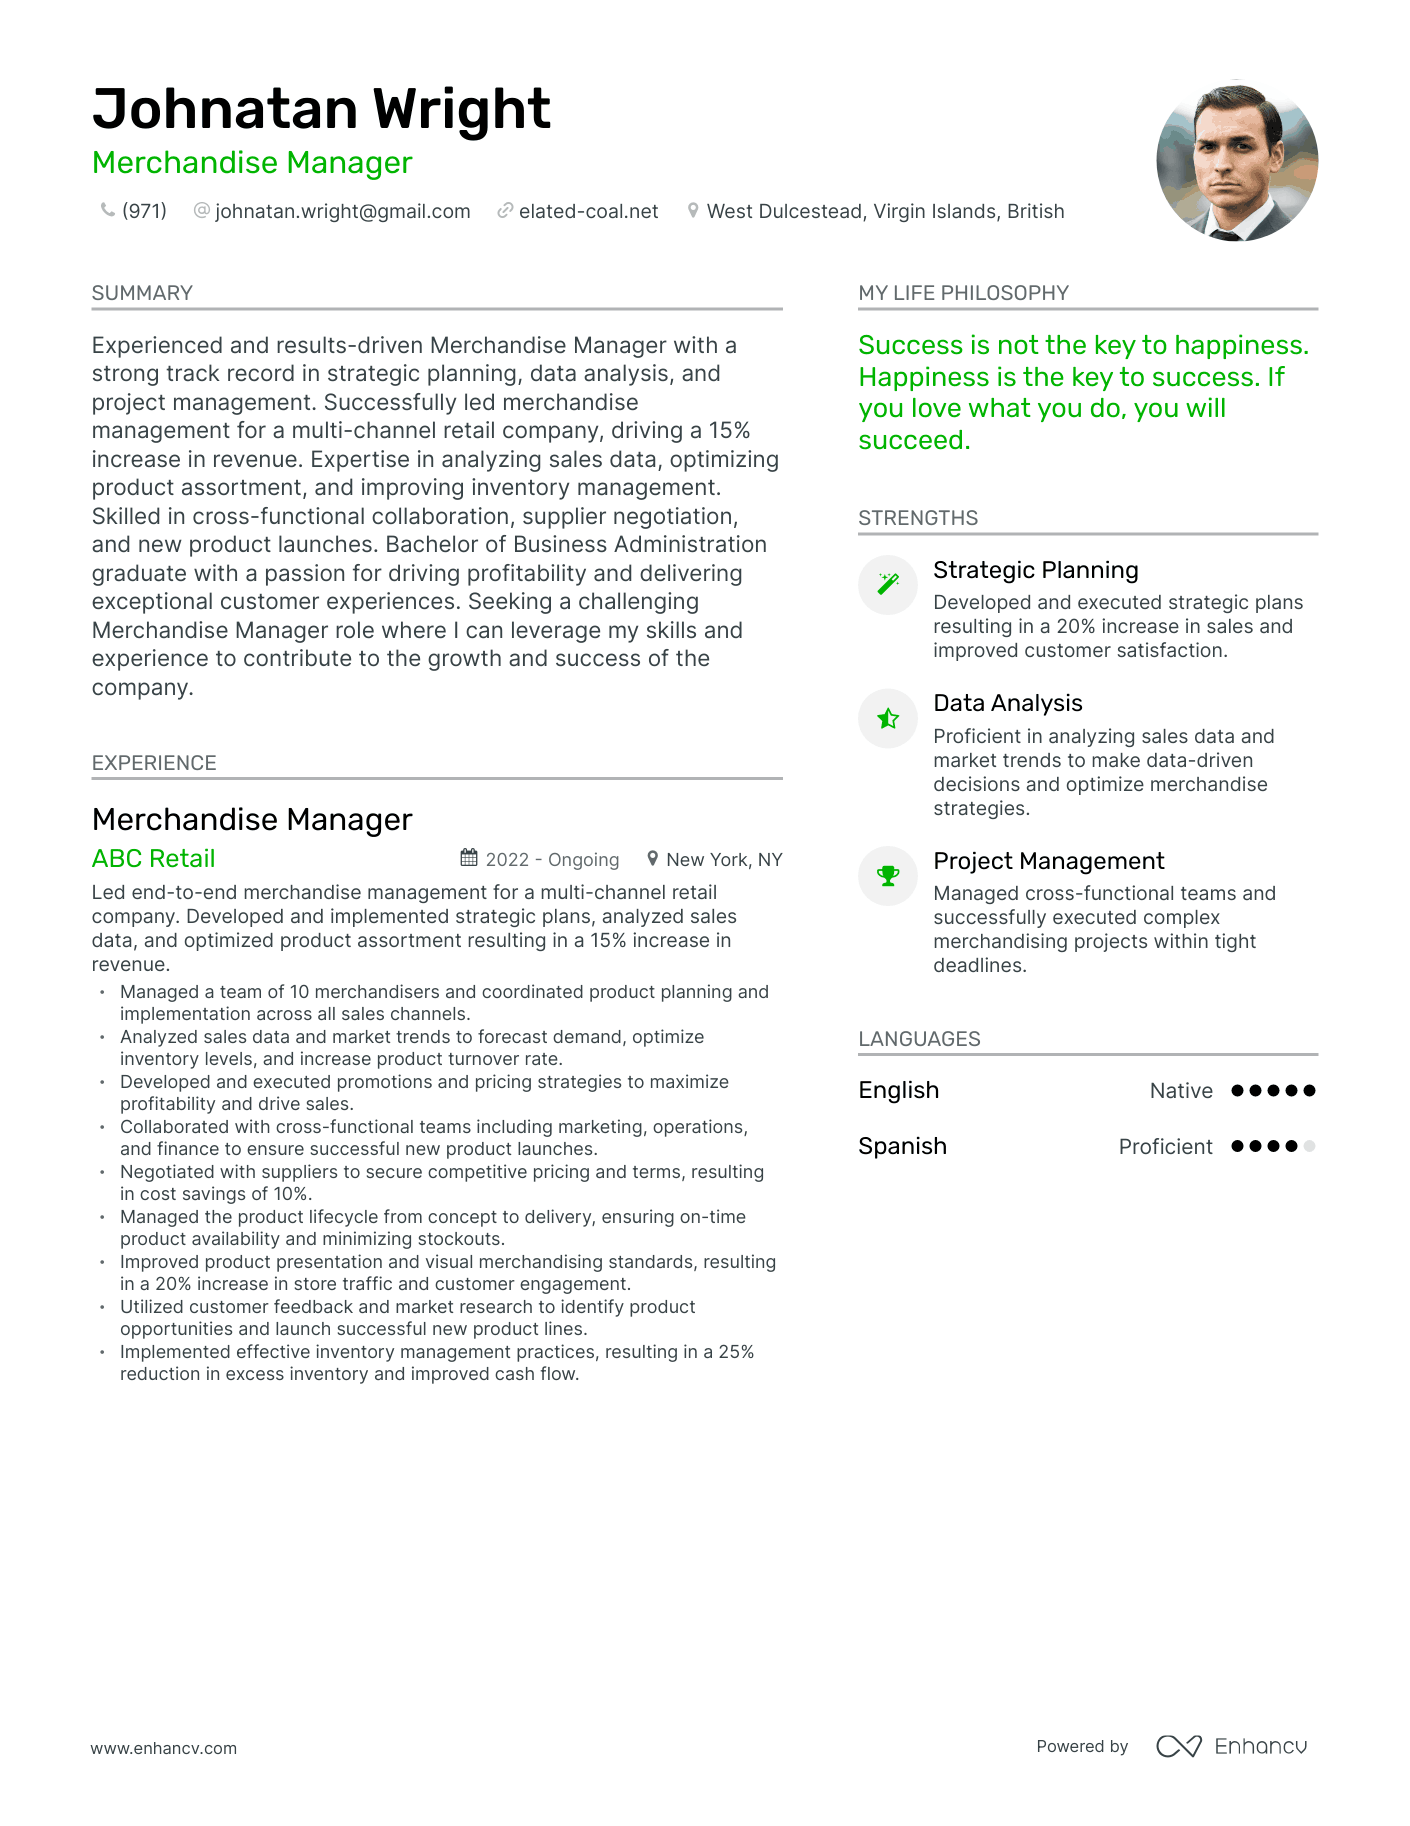 Merchandise Manager resume example